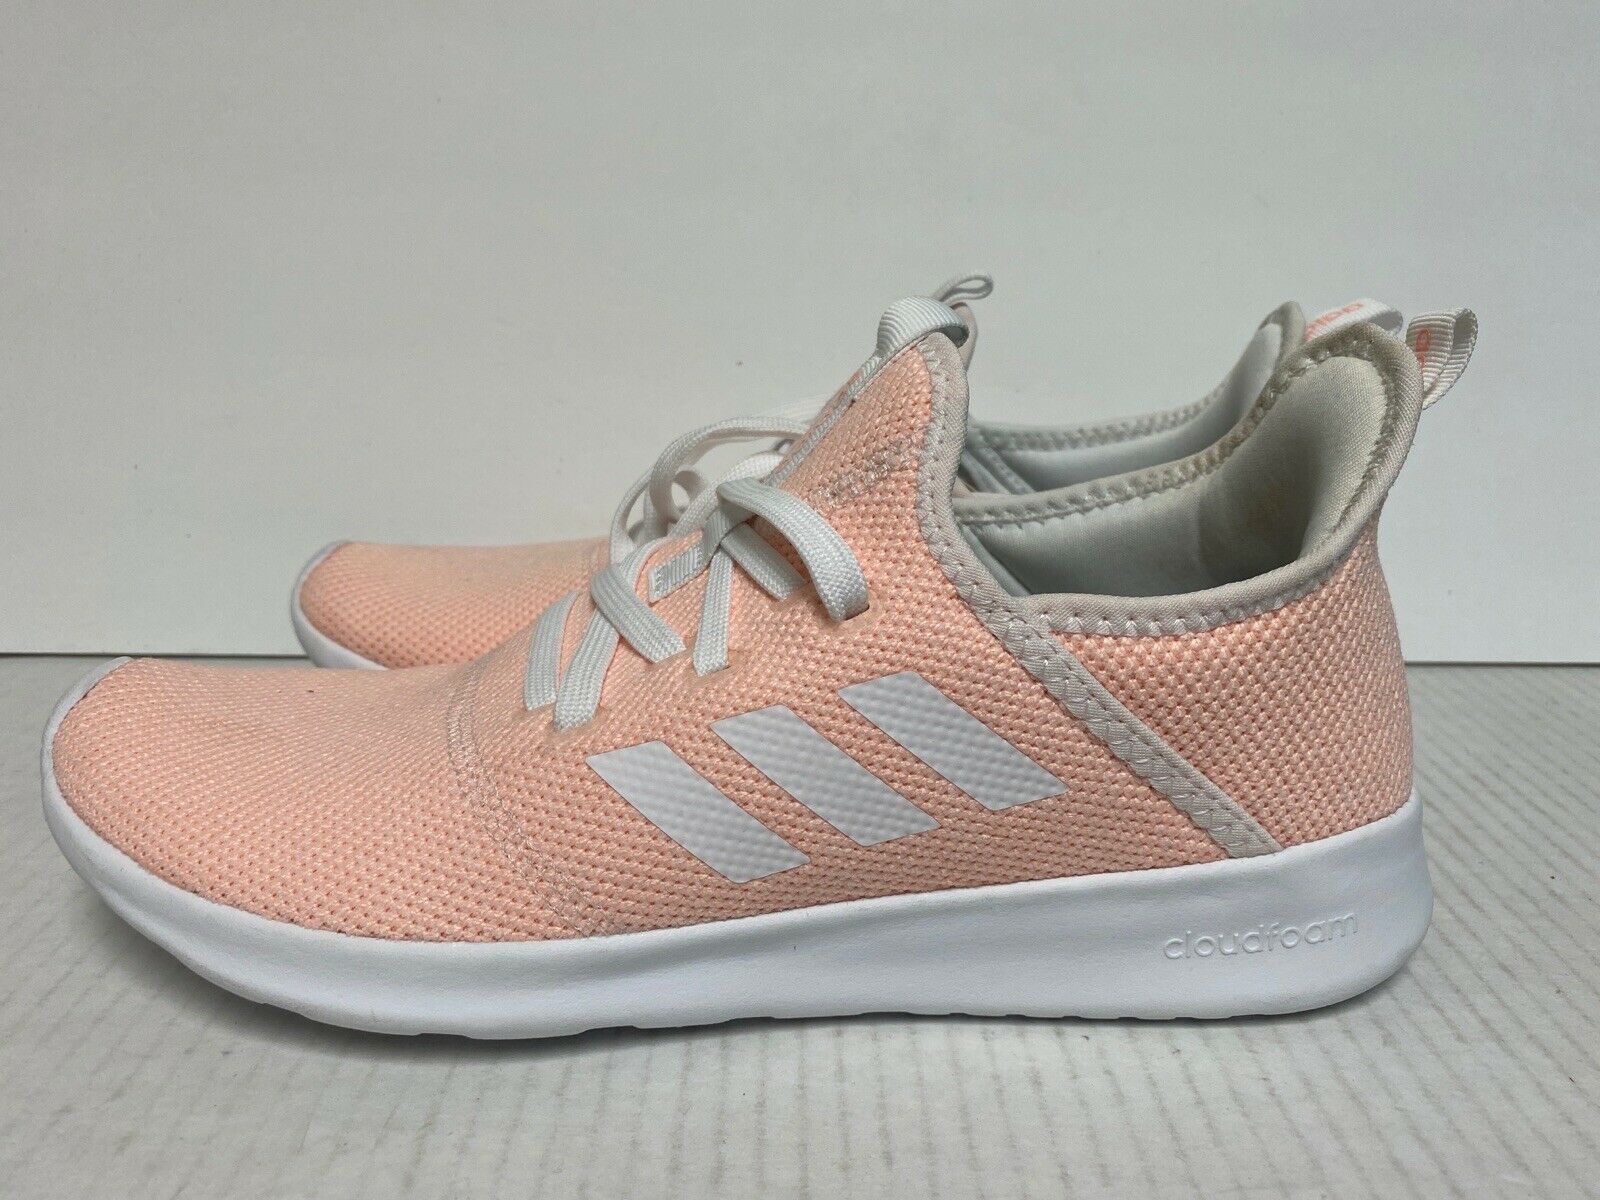 adidas women's active shoes